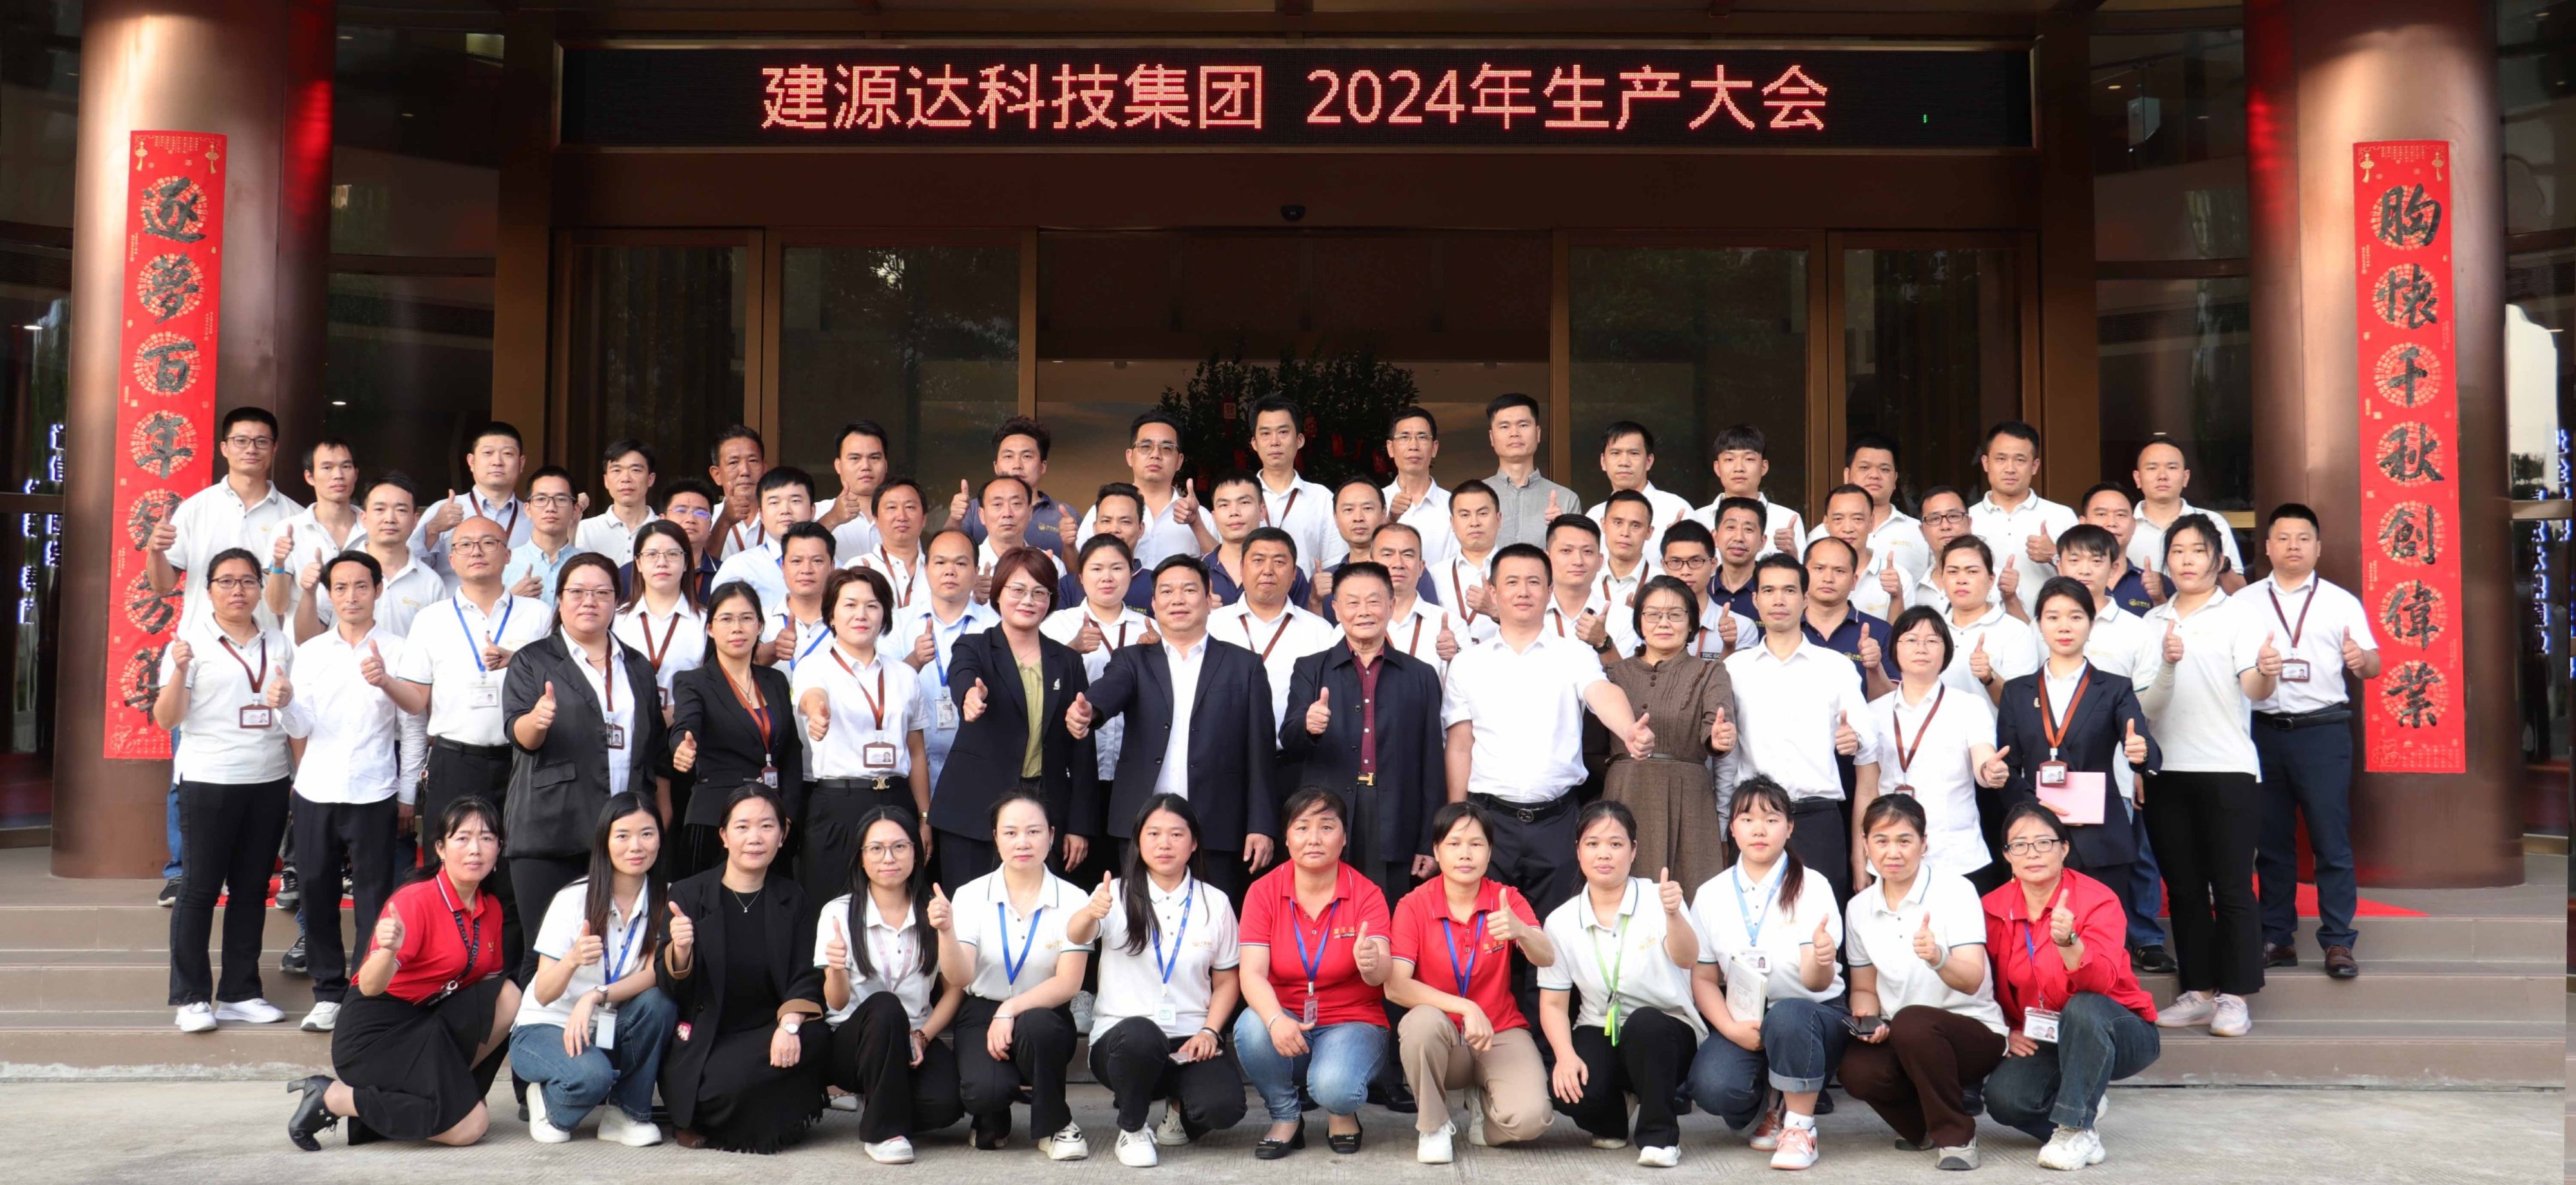 Jianyuanda Technology Group Charts a Course for Innovation at 2024 Production Conference